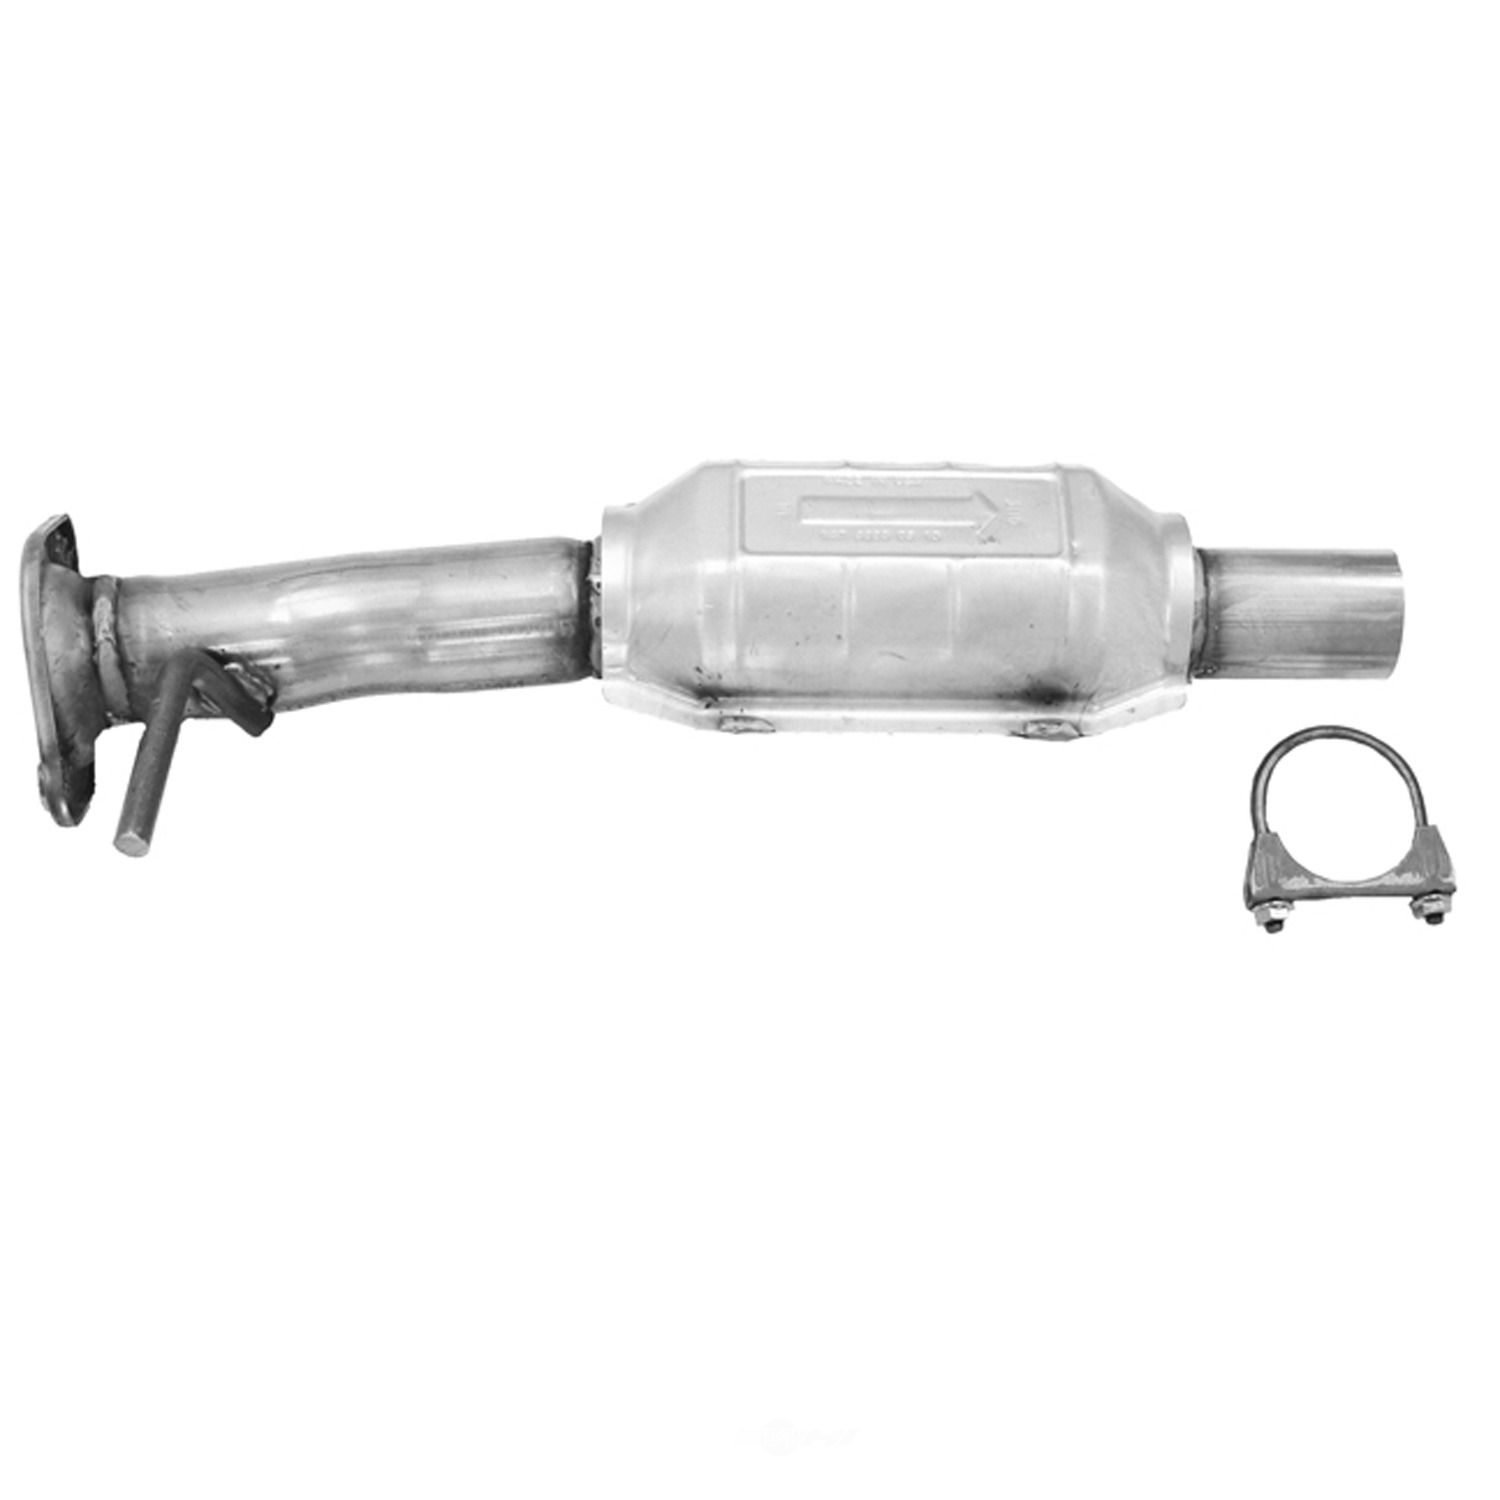 AP EXHAUST FEDERAL CONVERTER - Direct Fit Converter - APG 645456